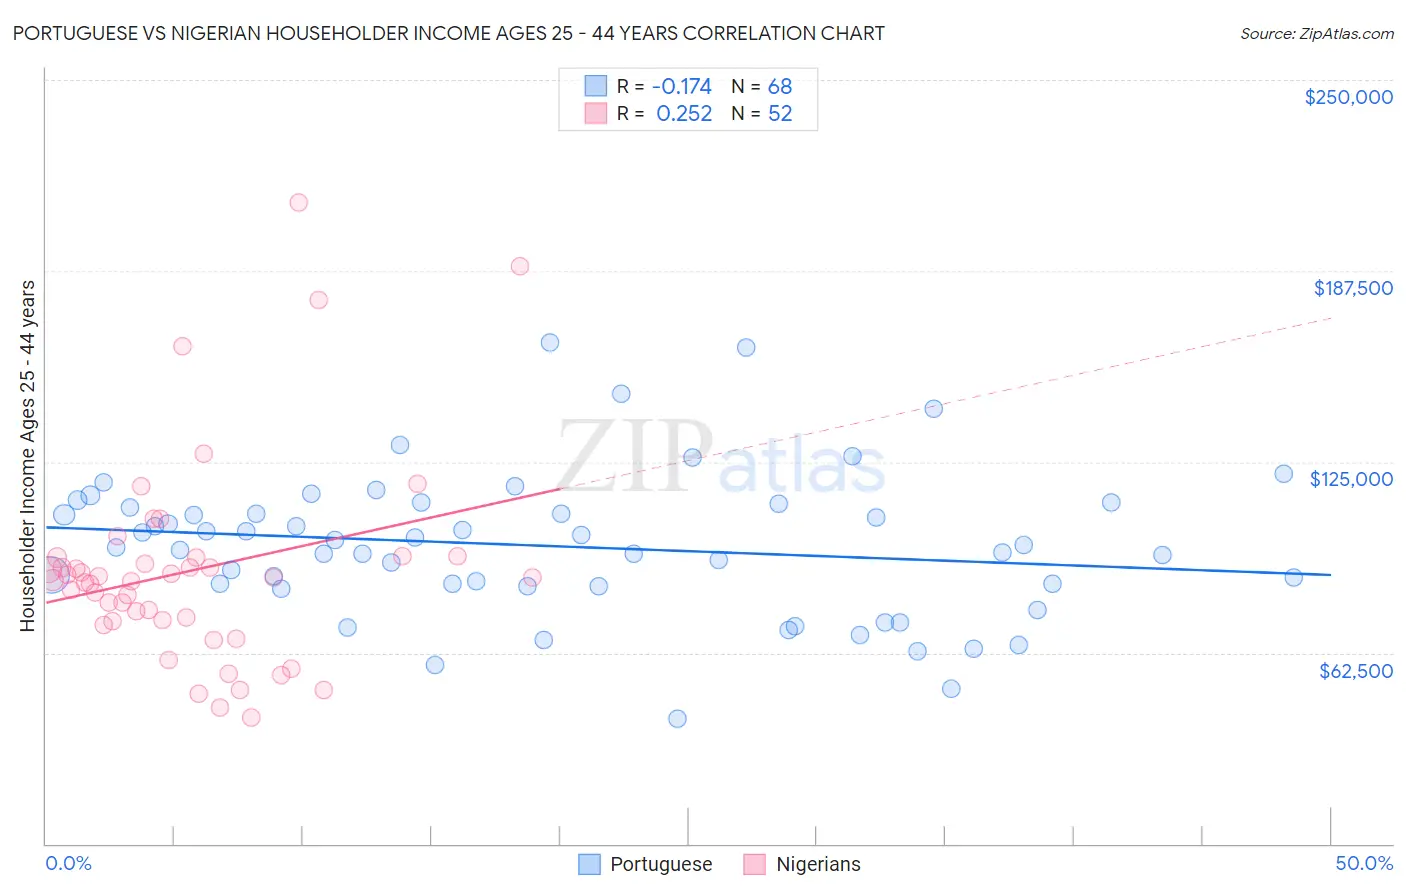 Portuguese vs Nigerian Householder Income Ages 25 - 44 years